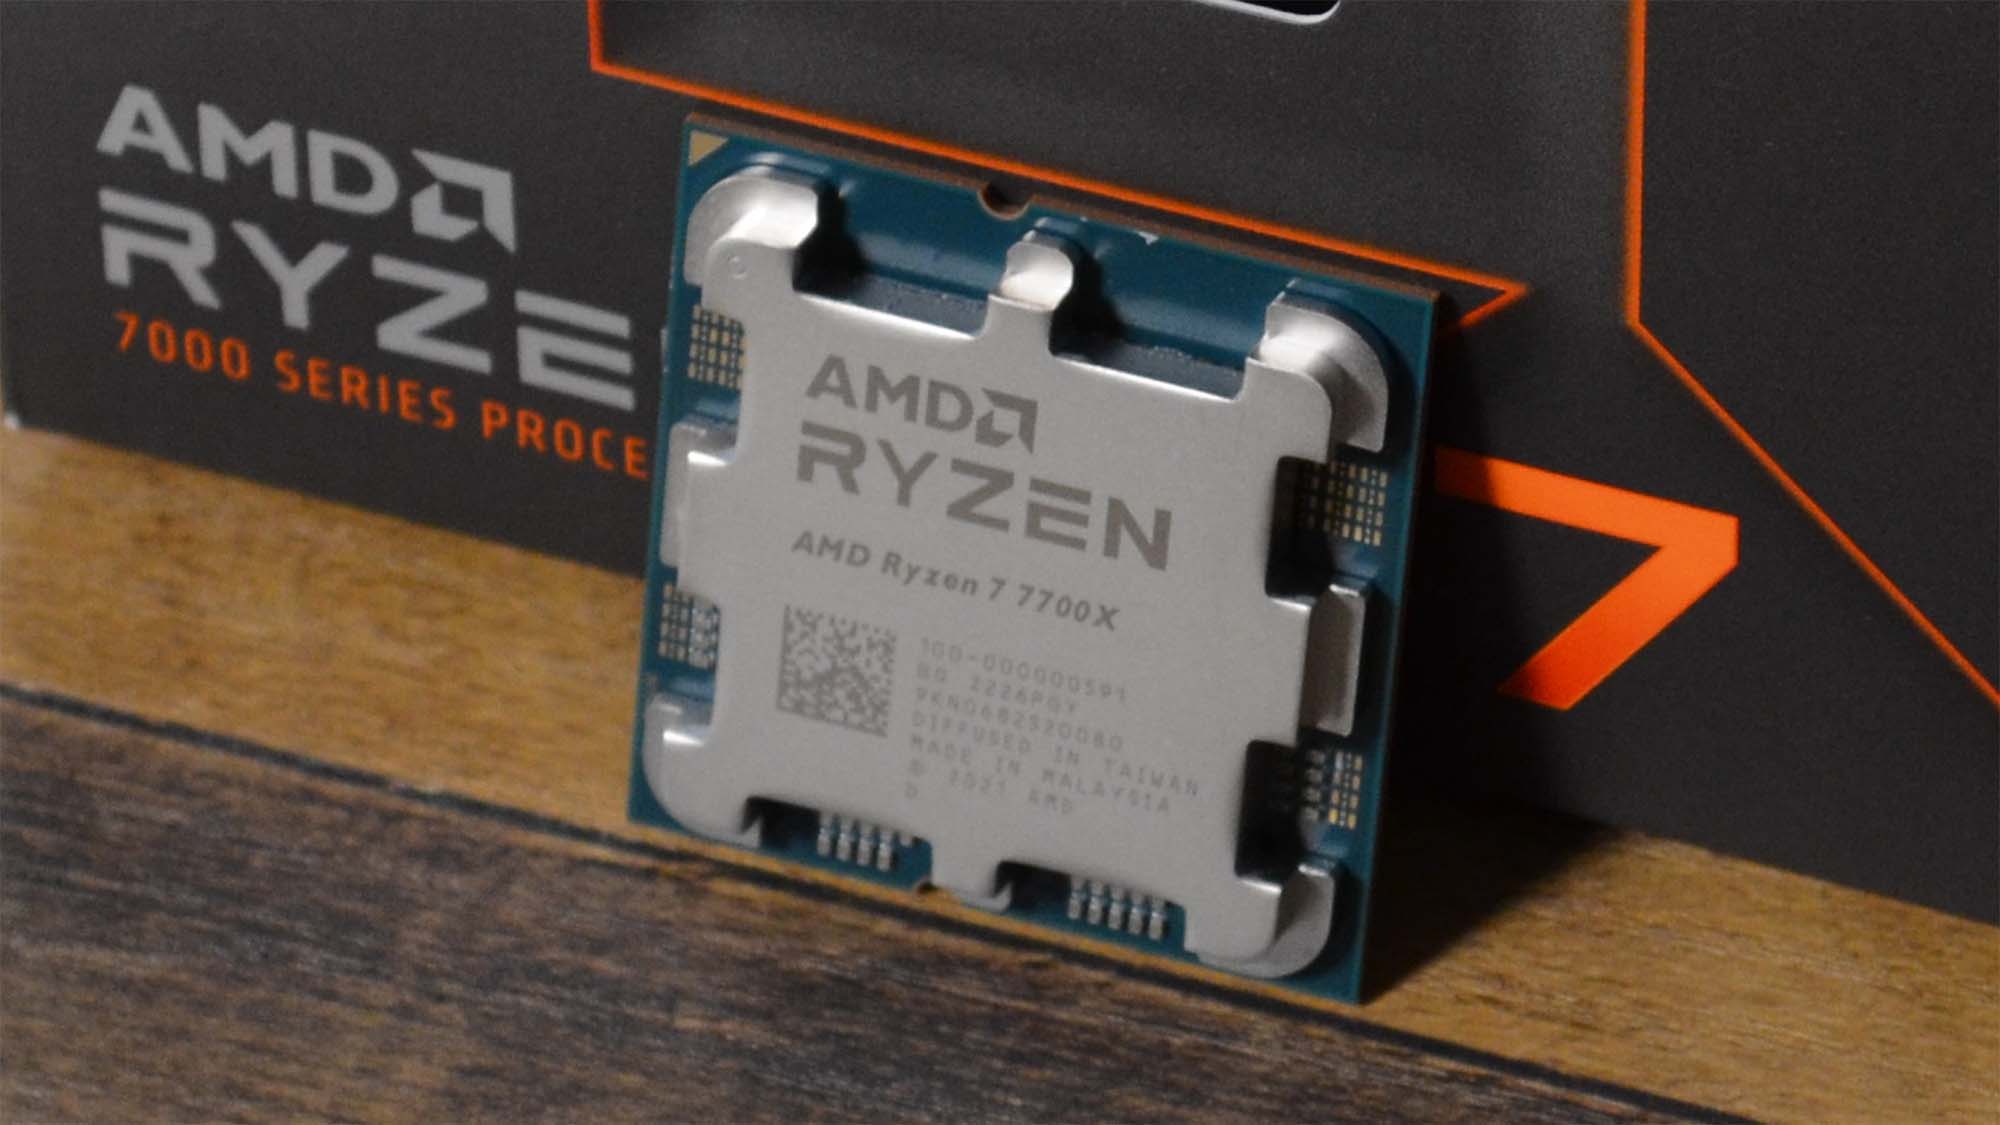 AMD Ryzen 7 7700X review: the best processor for most people